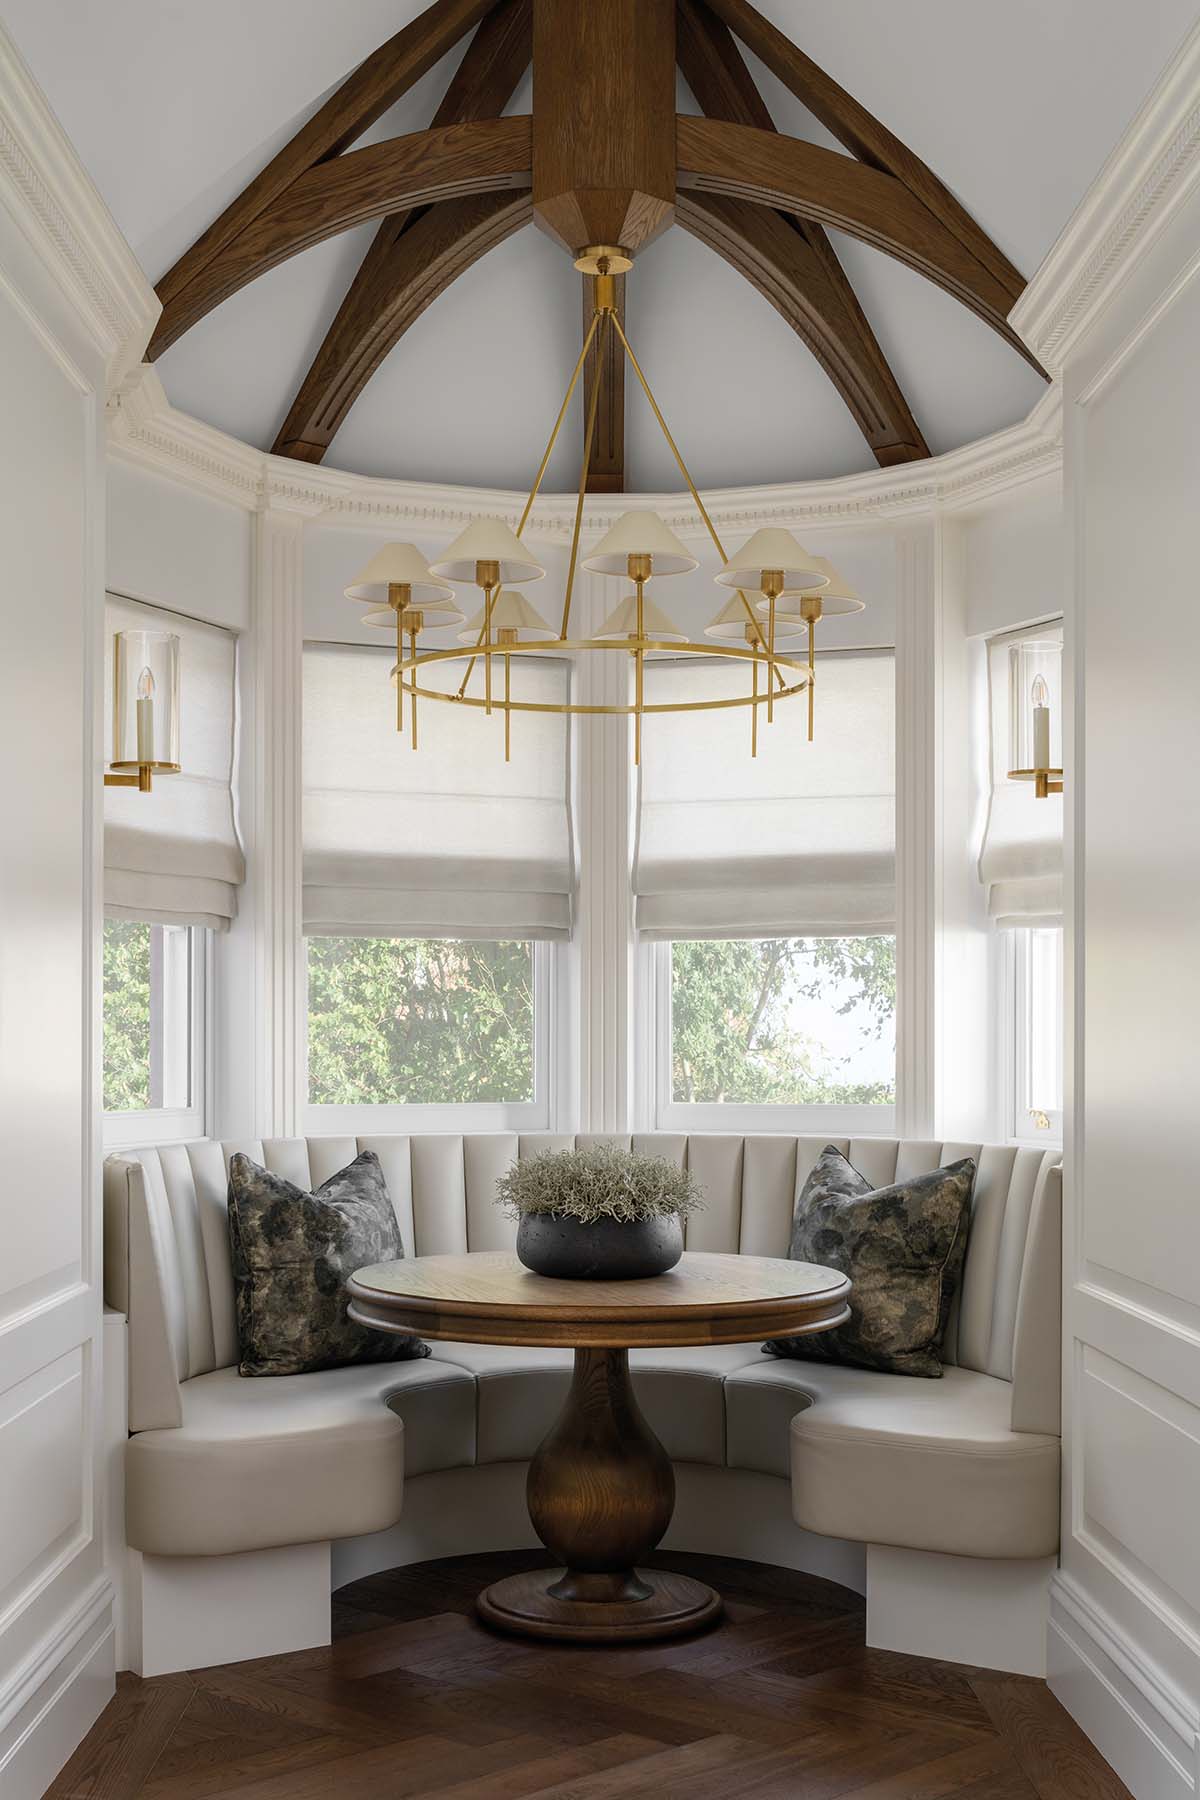 window nook with banquette seating and domed ceiling with oak beamed struts